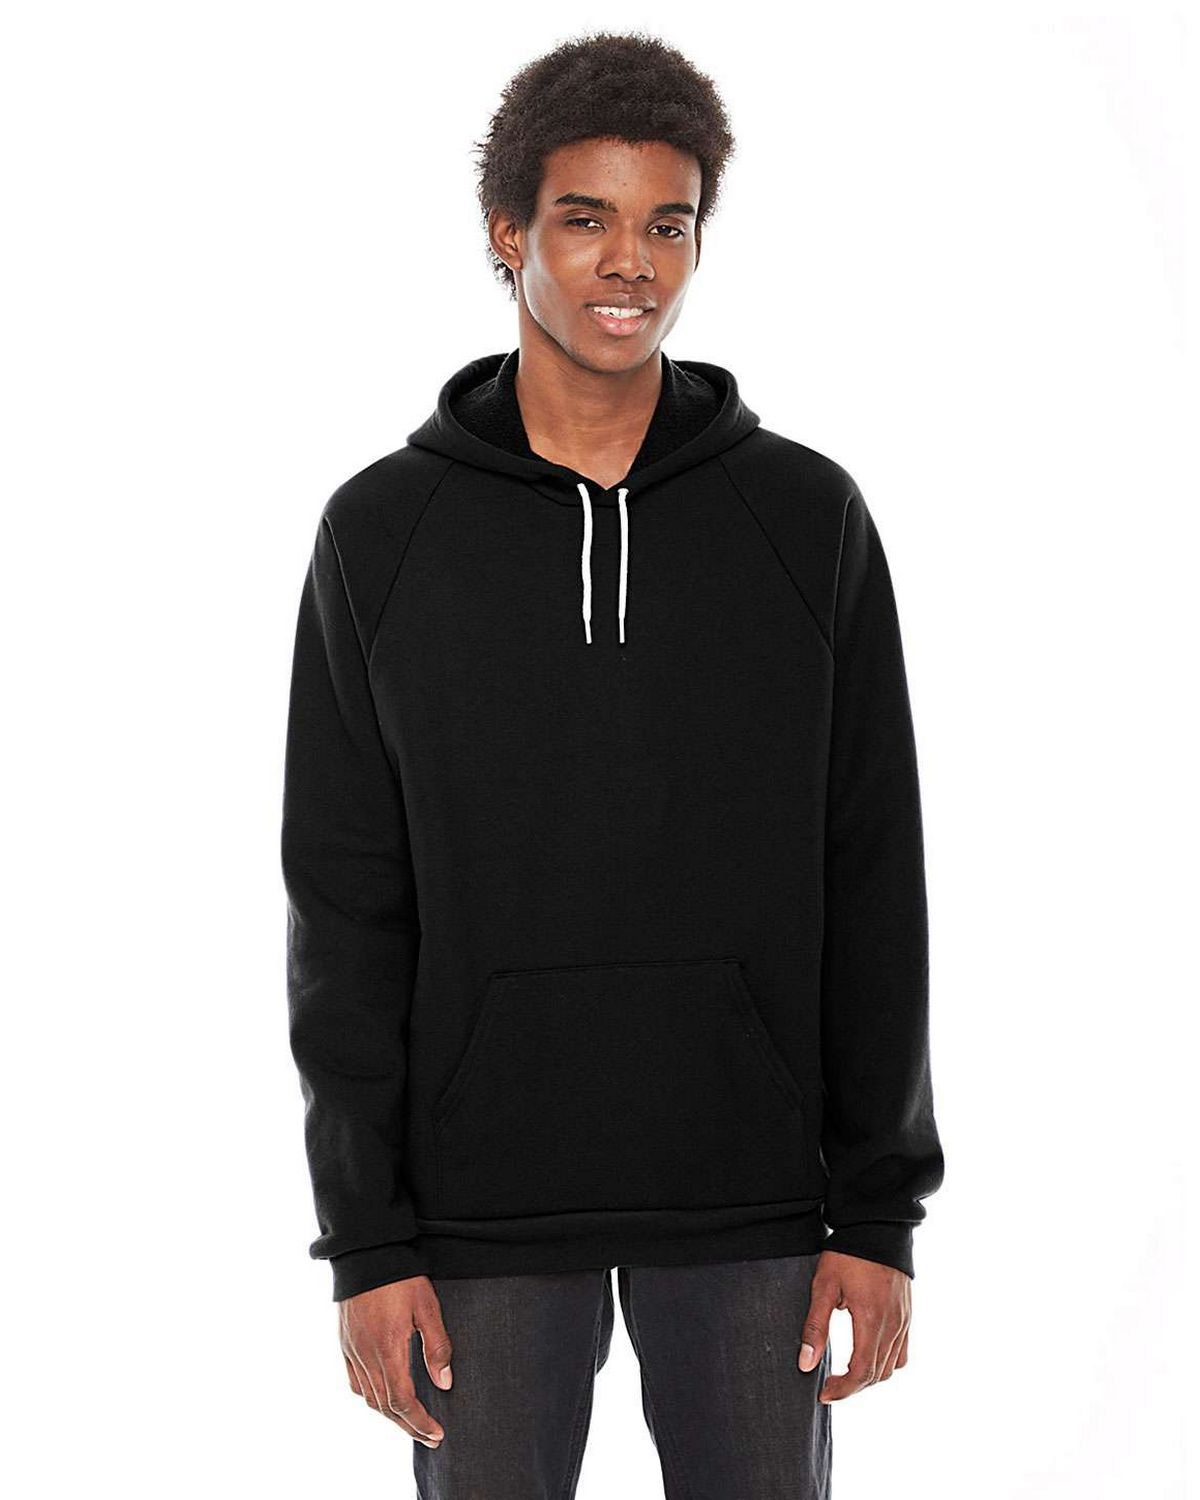 American Apparel HVT495W Unisex Classic Pullover Hoodie